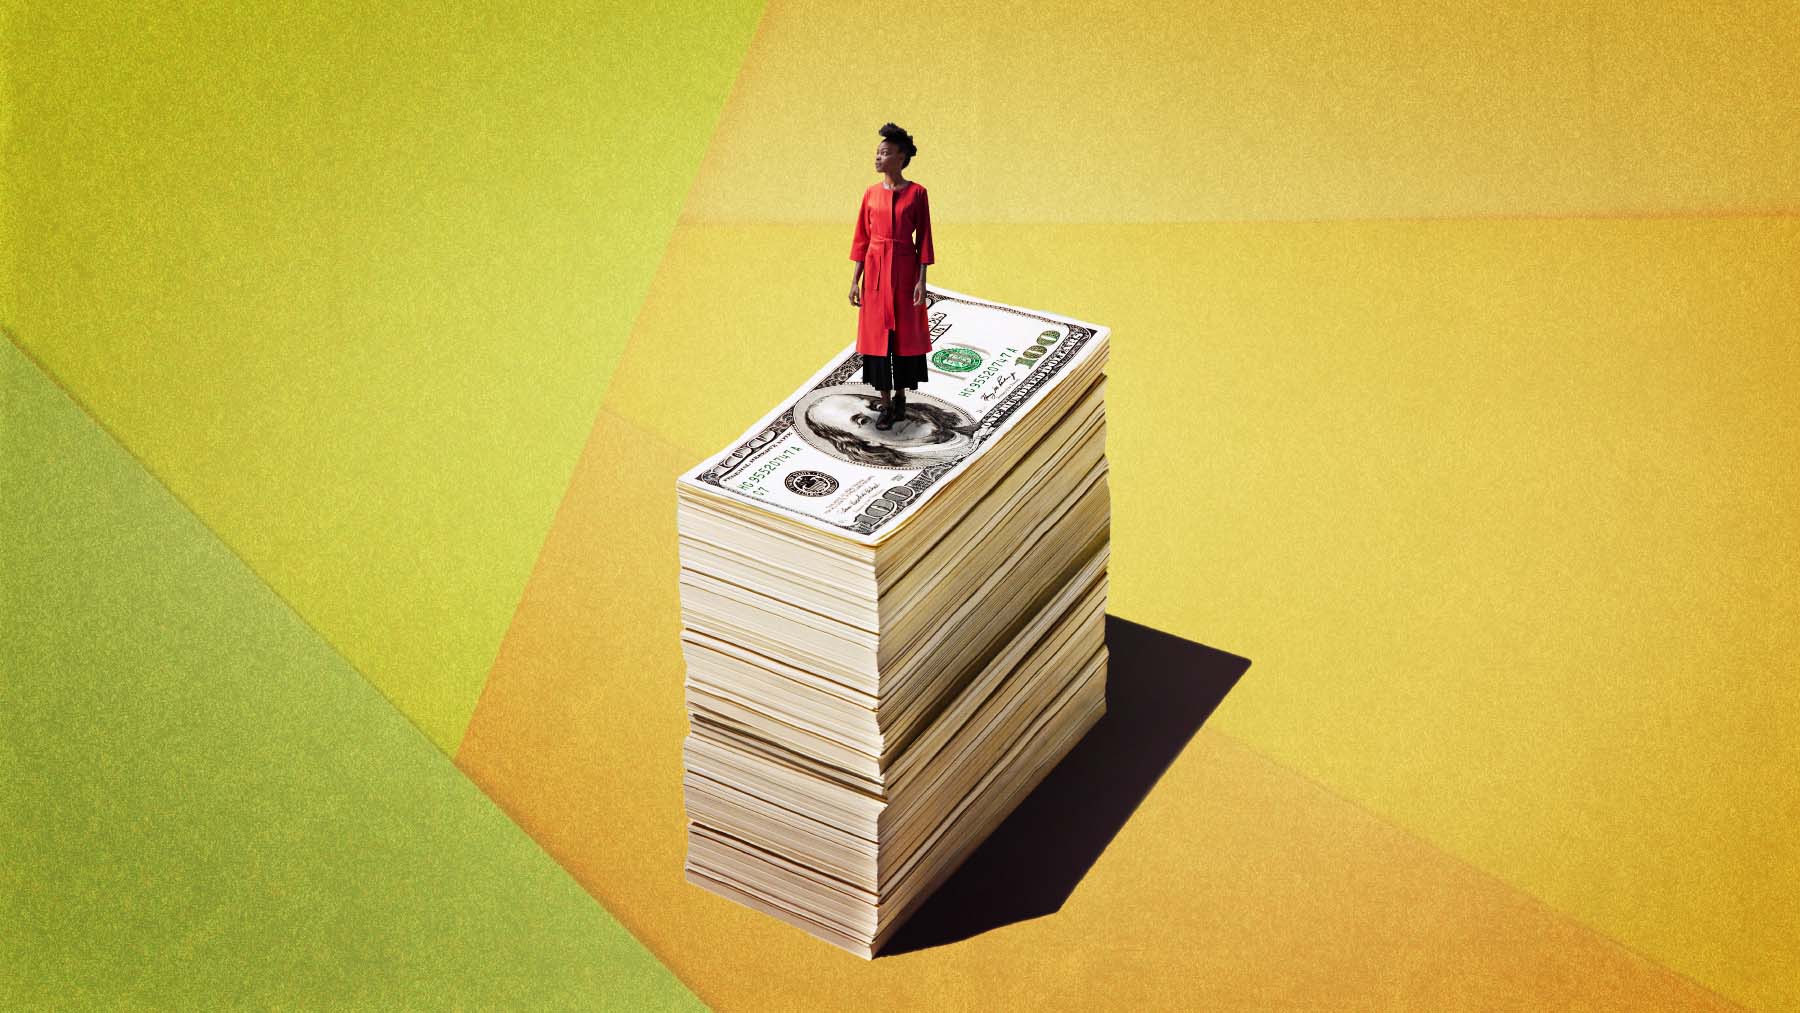 An illustration of a Black person standing on top of a stack of $100 bills against a textured felt background.